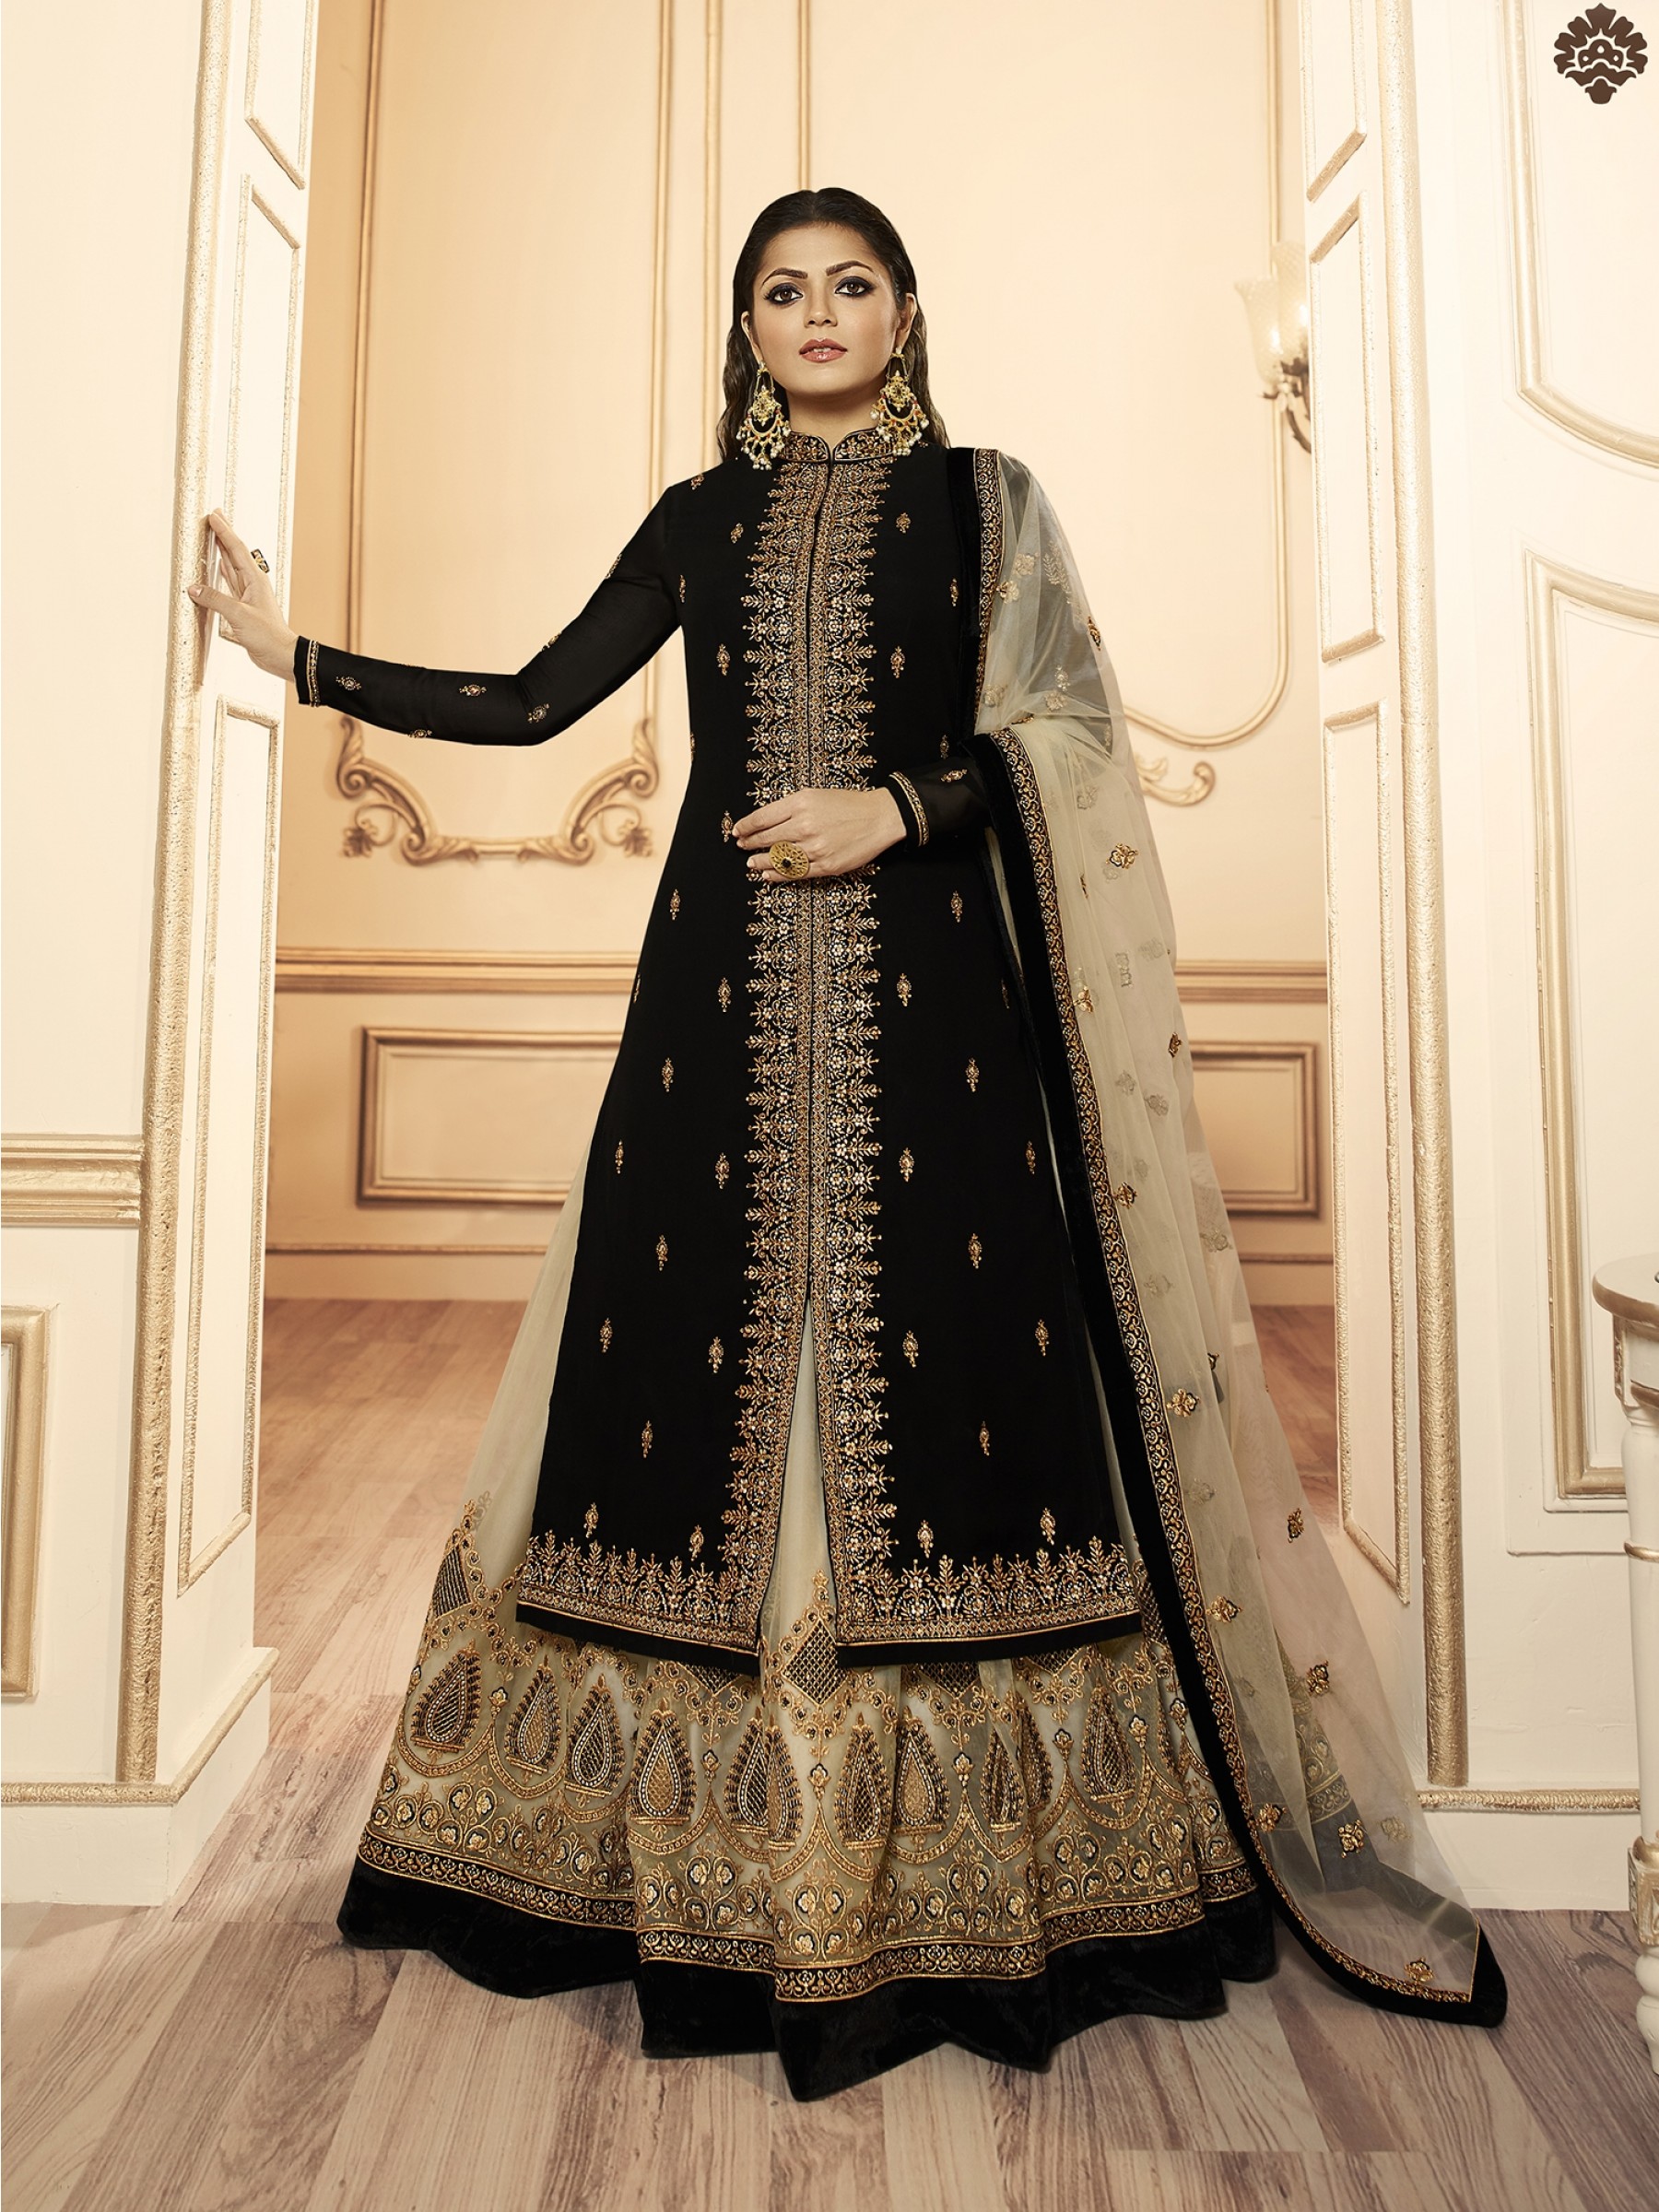  Georgette With Soft Premium Net  Party Wear Readymade Lehenga  In Black & Beige Color With Embroidery